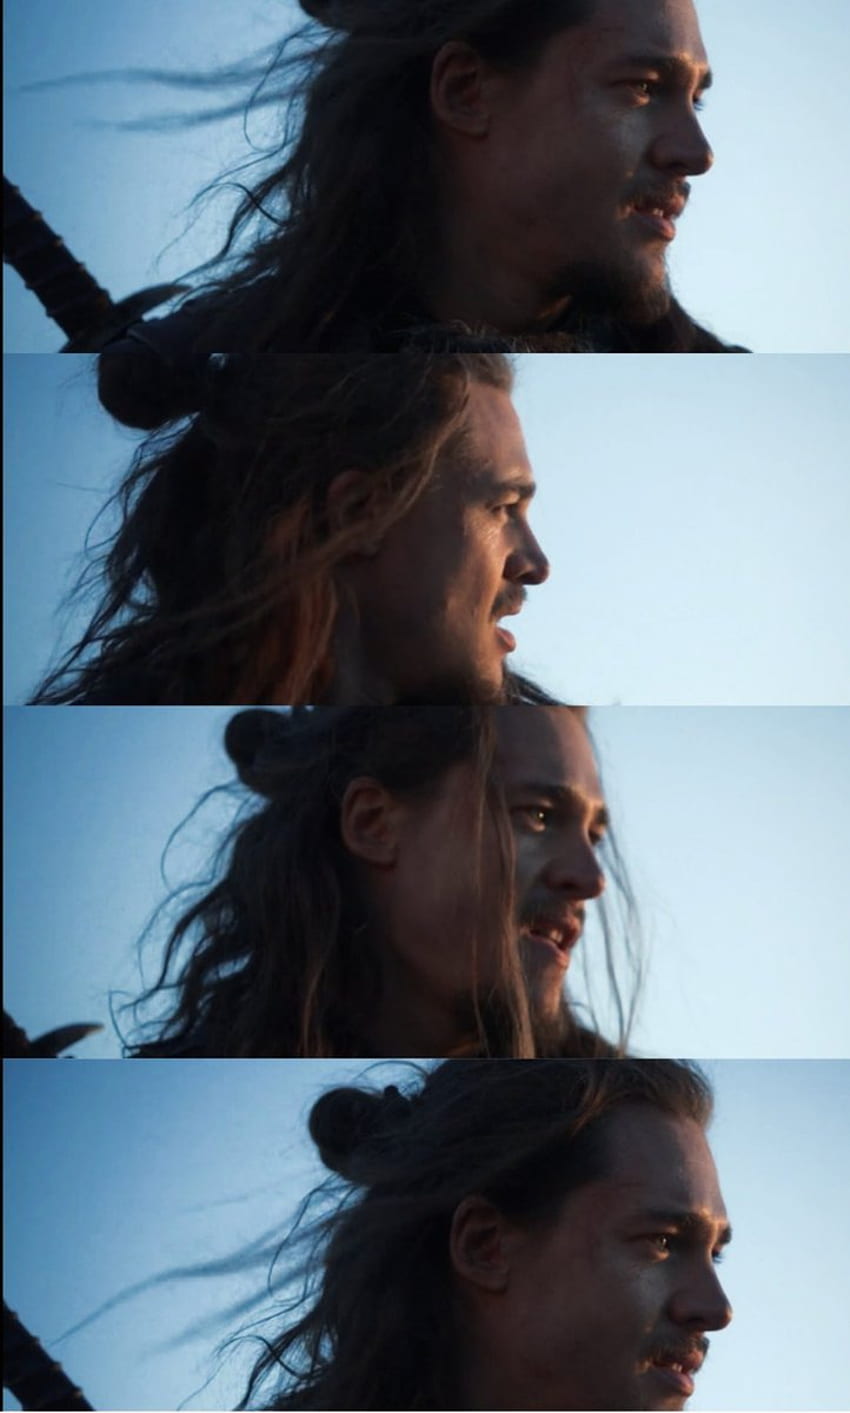 Ashu - I have been that damned OBSESSED with uhtred that i took screenshots of his scenes and made . Hope y'all like it! I'll be posting more if you want HD phone wallpaper